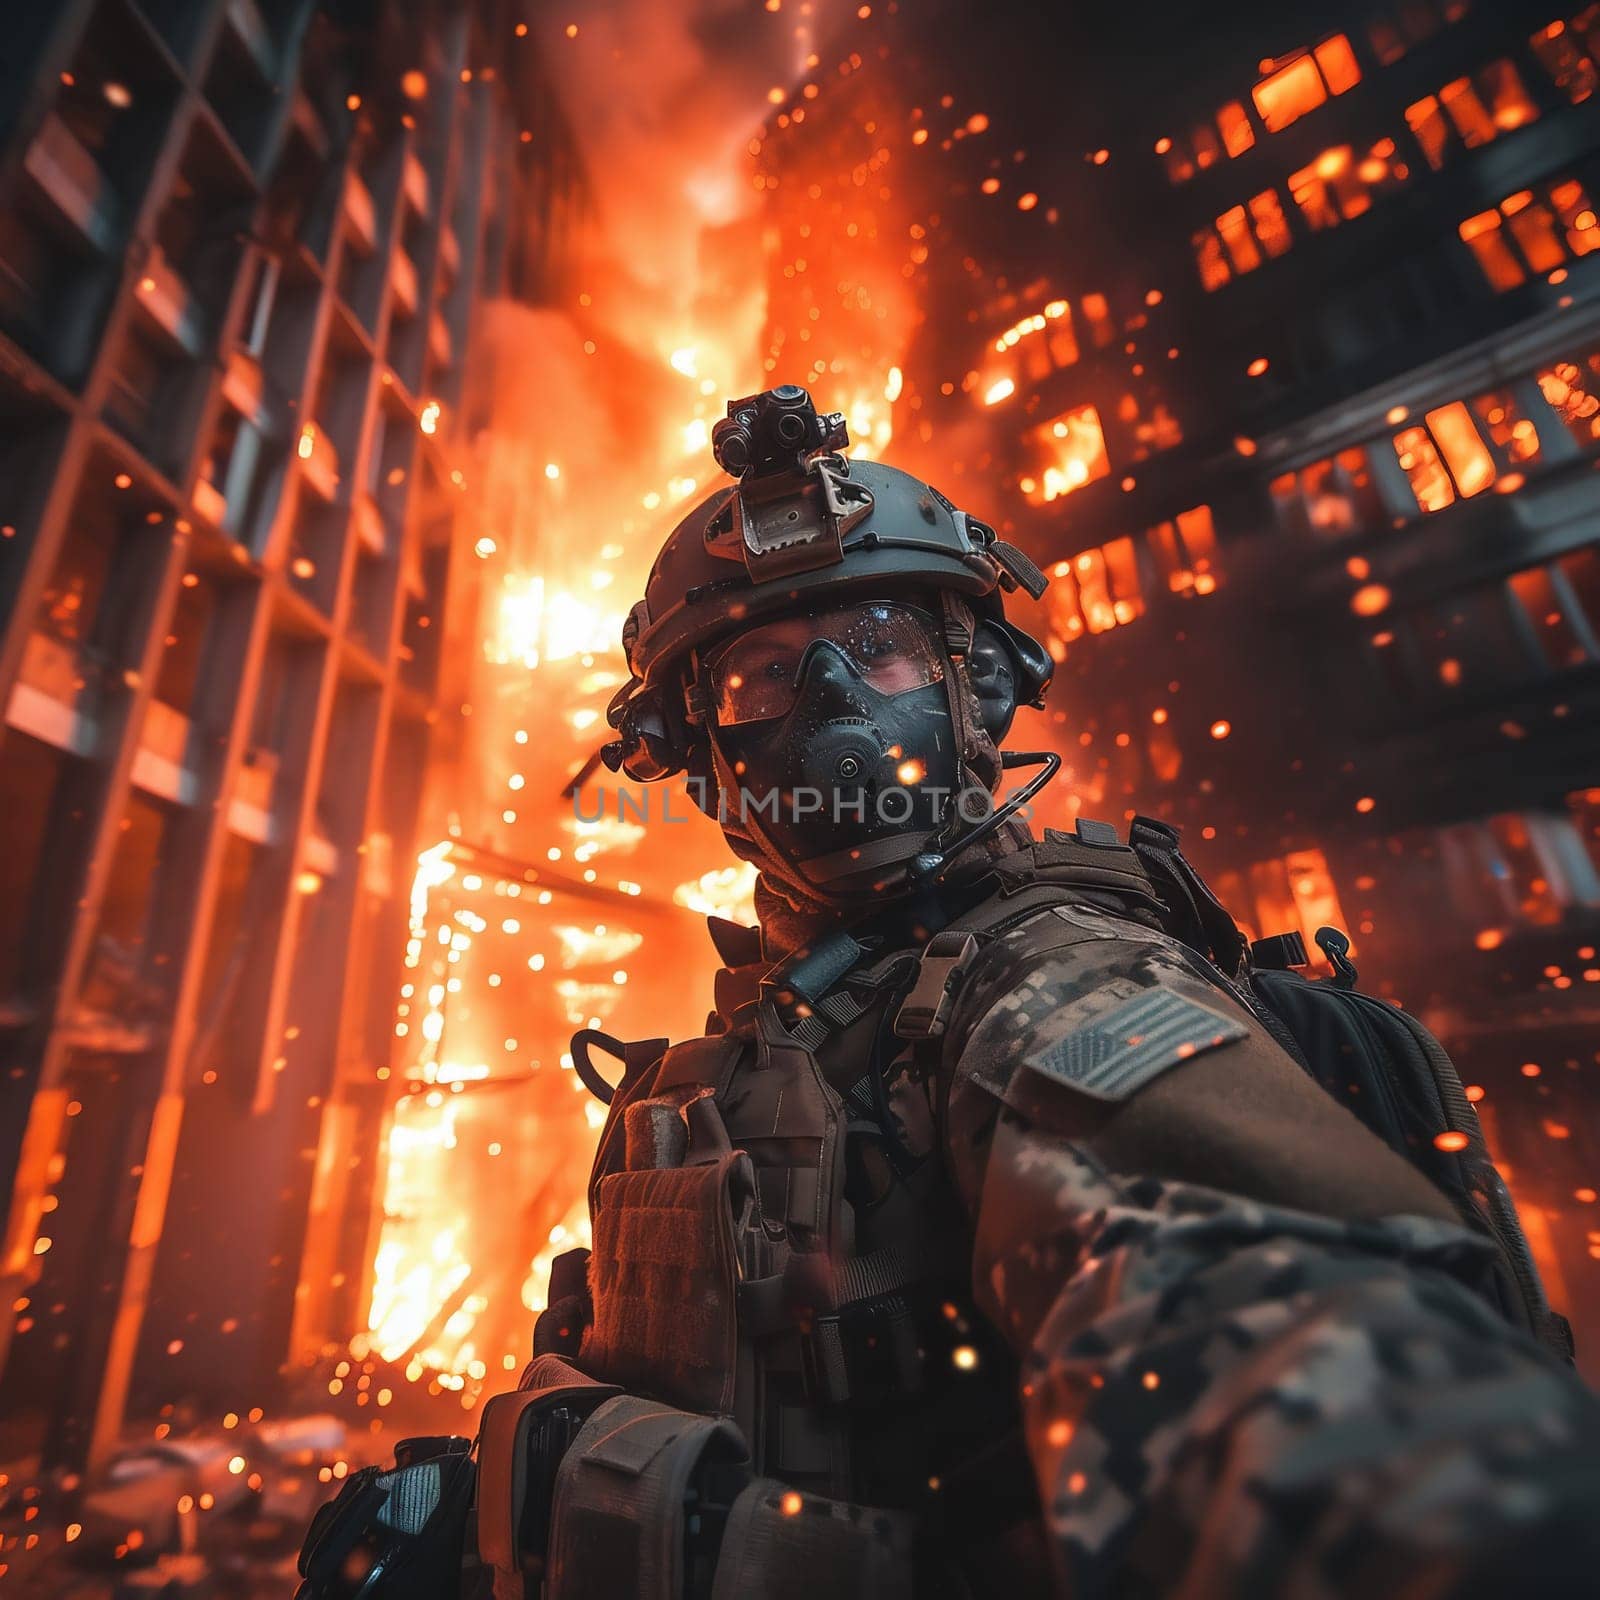 A soldier fights in a warforest area surrounded by fire. High quality photo